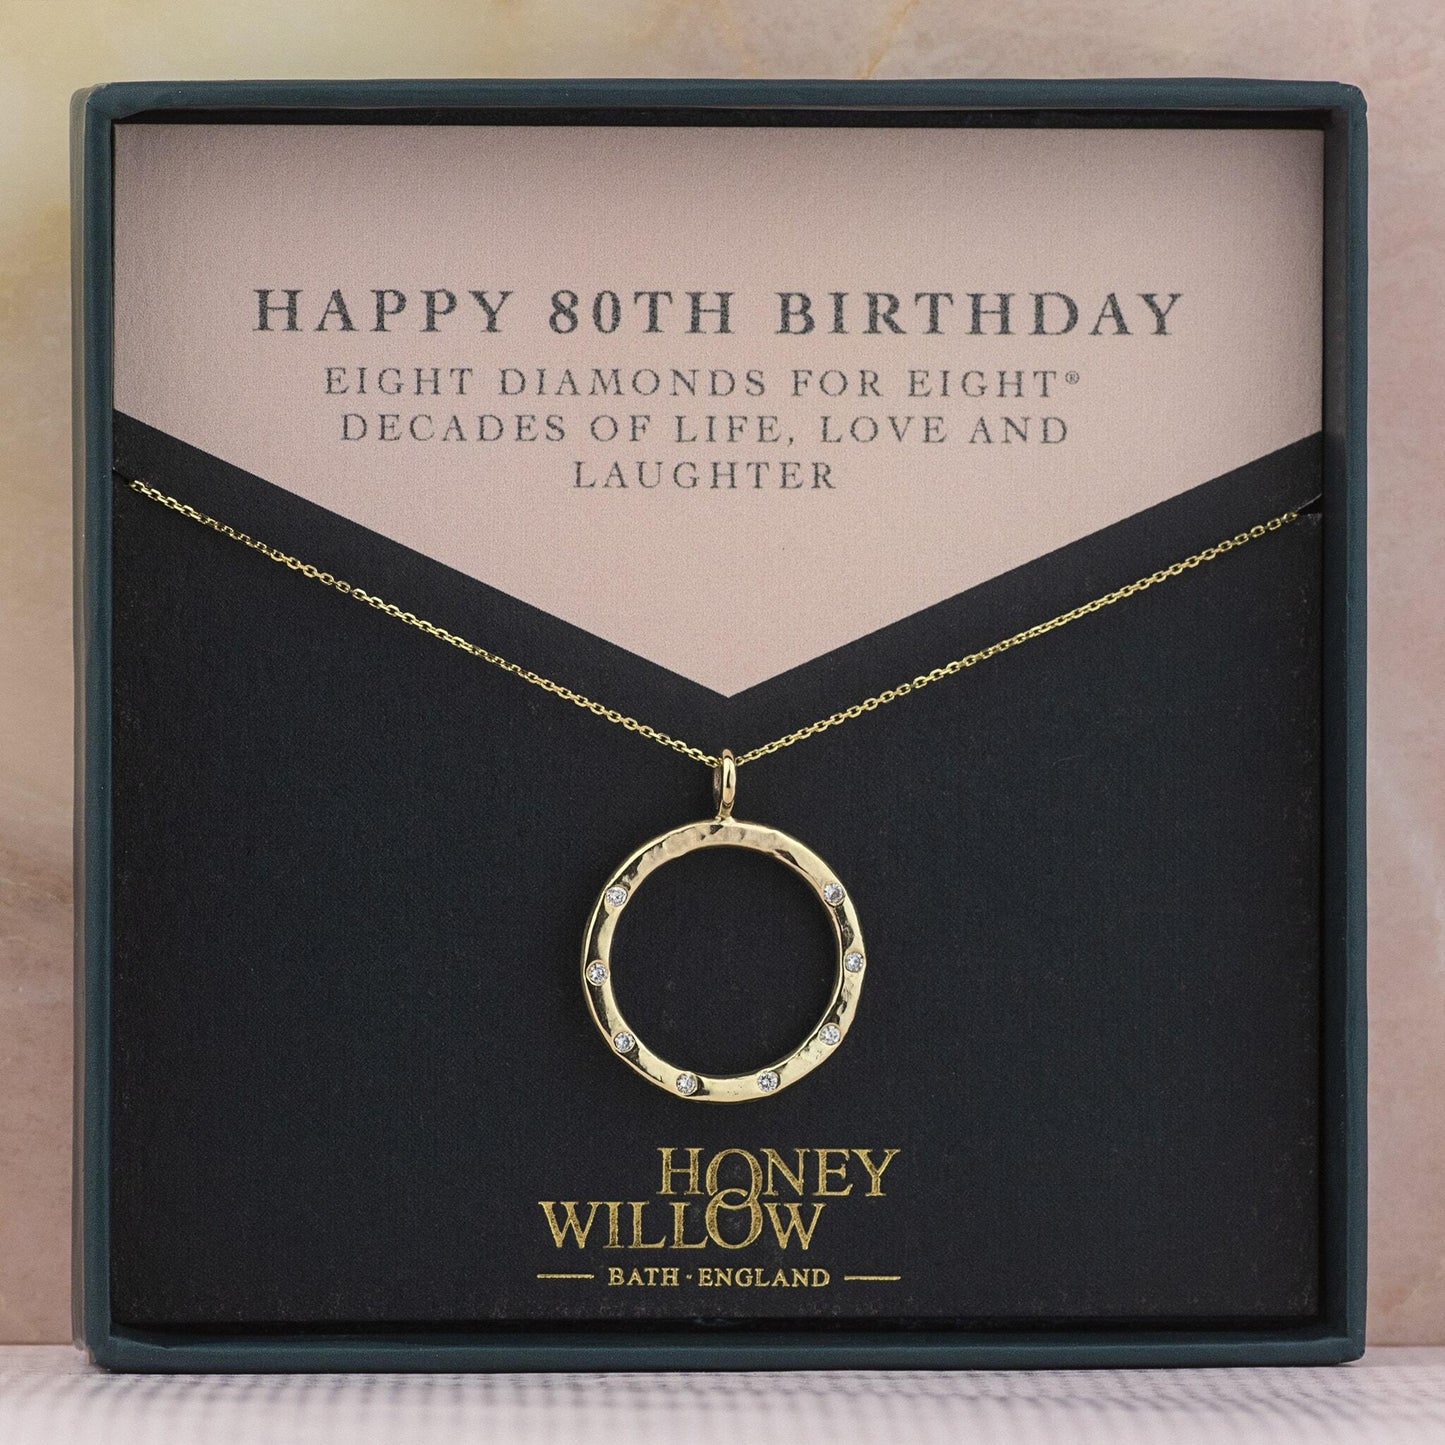 80th Birthday Gift - Recycled 9kt Gold Diamond Halo Necklace - 8 Diamonds for 8® Decades